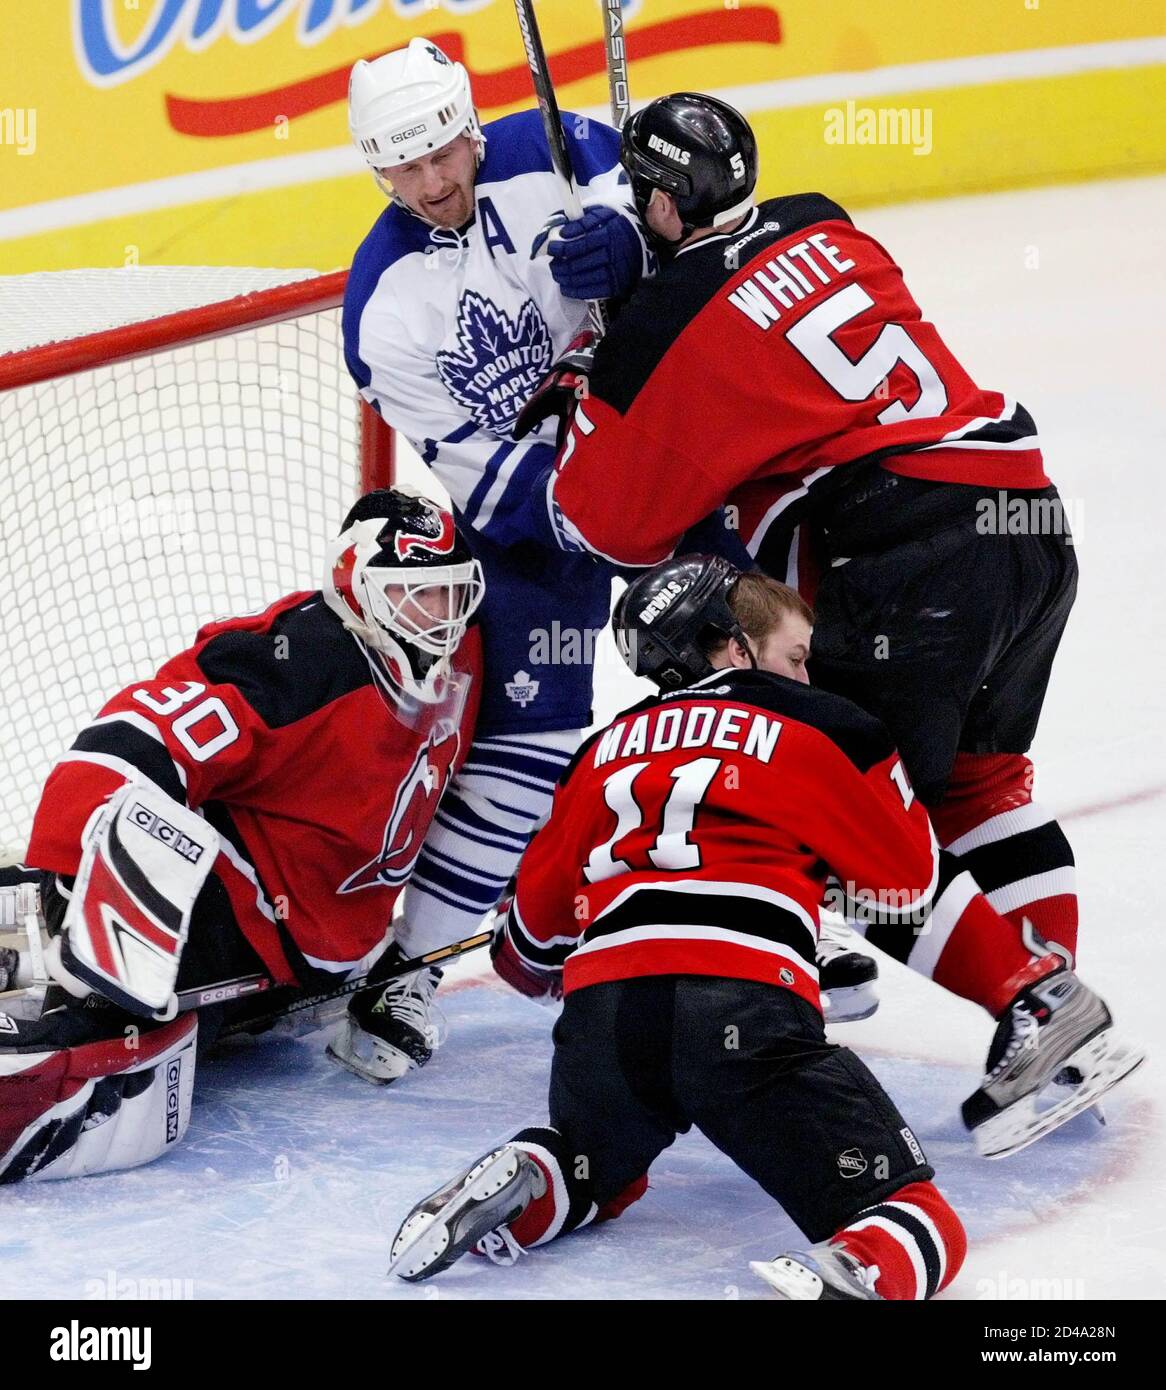 Toronto Maple Leafs Gary Roberts (C) is roughed up in the crease of New Jersey Devils goalie Martin Brodeur (30), by Devils defenseman Colin White (5) and forward John Madden (11) during first period play in Toronto, January 10, 2004. REUTERS/Andrew Wallace  ANW Stock Photo